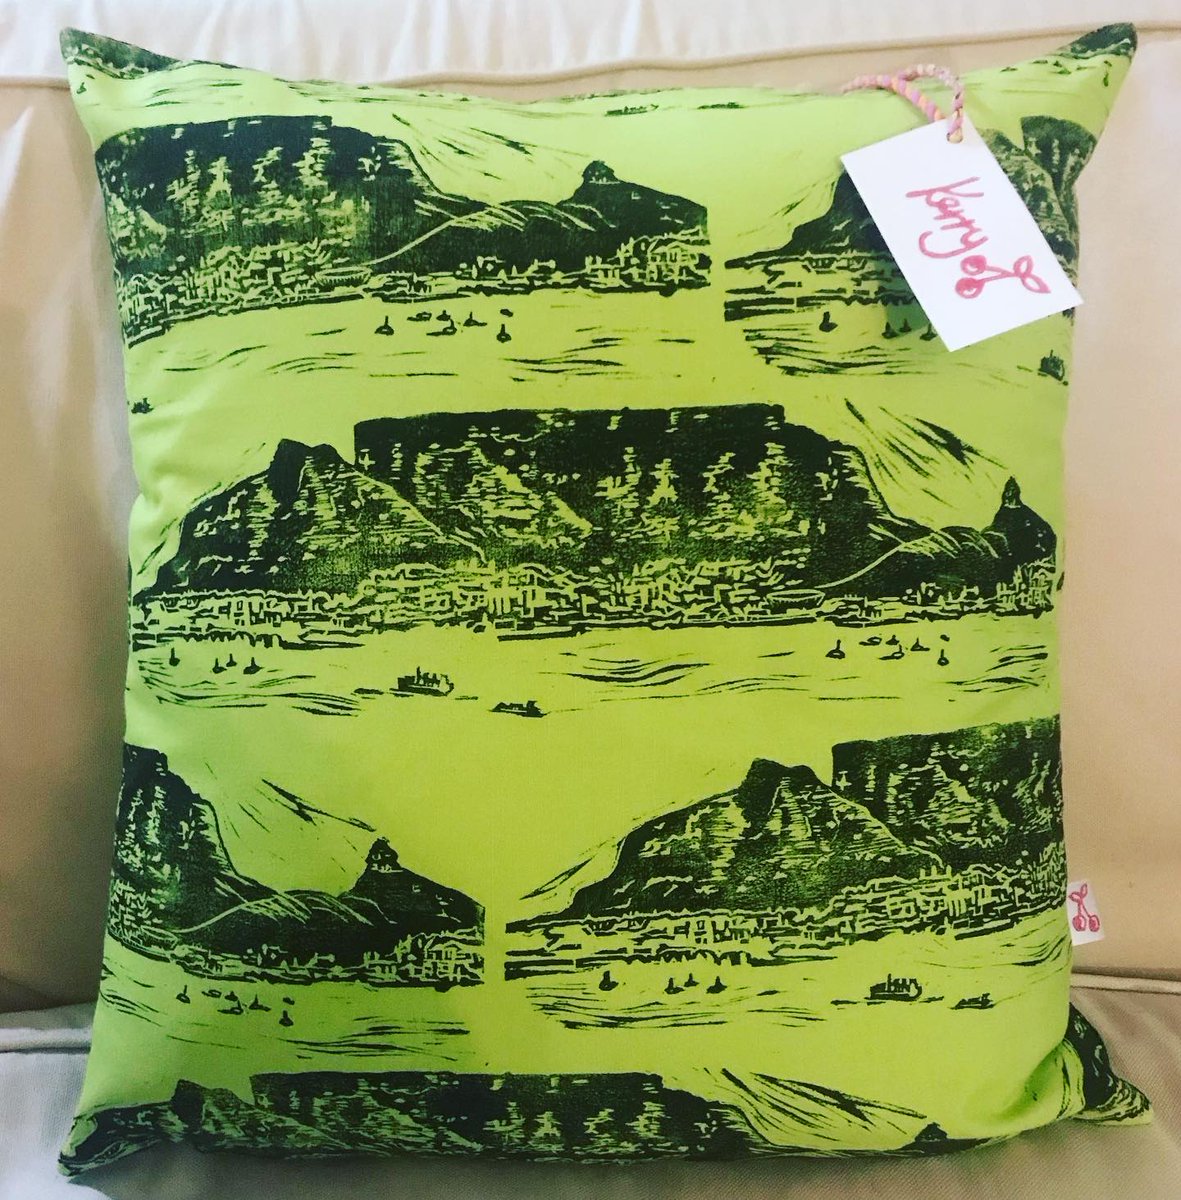 Hand printed Lime green Table Mountain cushion cover. Available in any size and colour. #tablemountain #handprintedtextiles #CapeTown